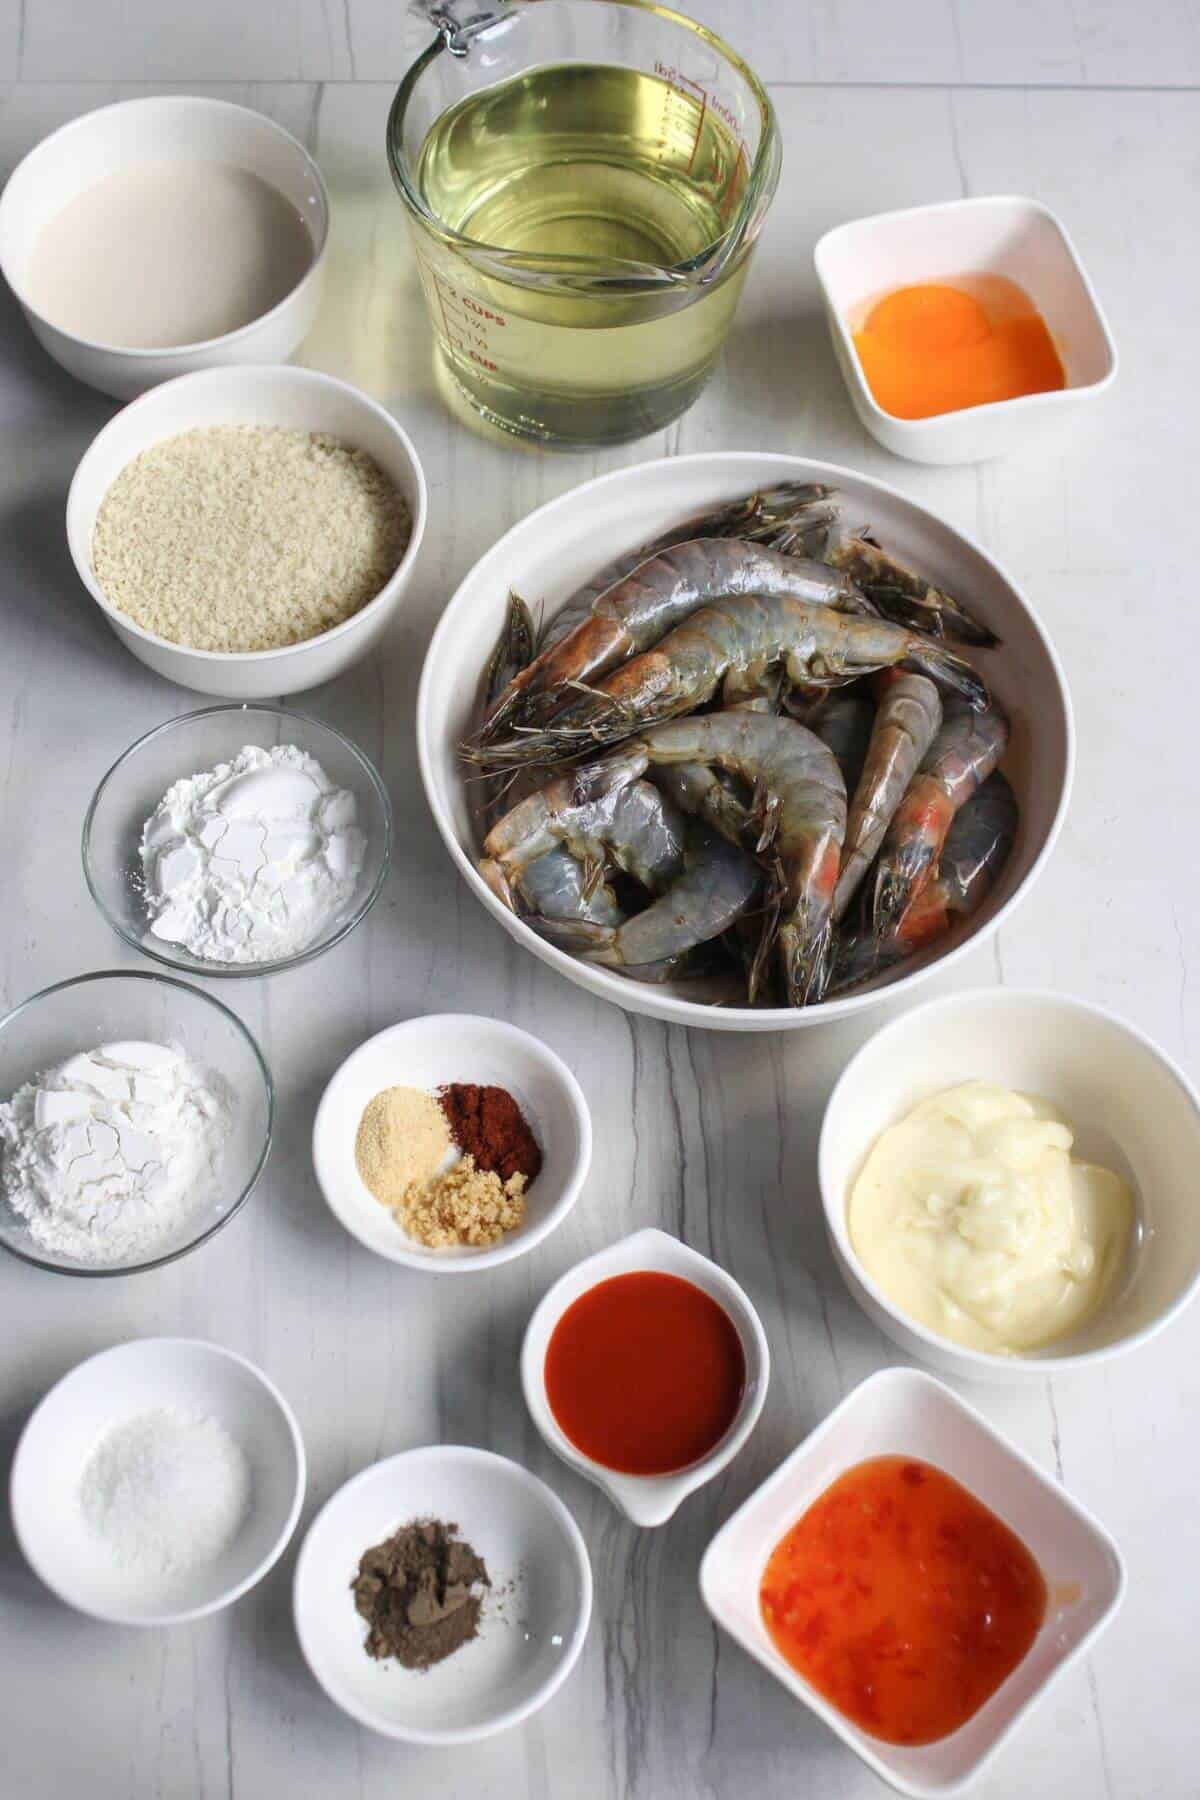 The ingredients for a dish of fried shrimp.